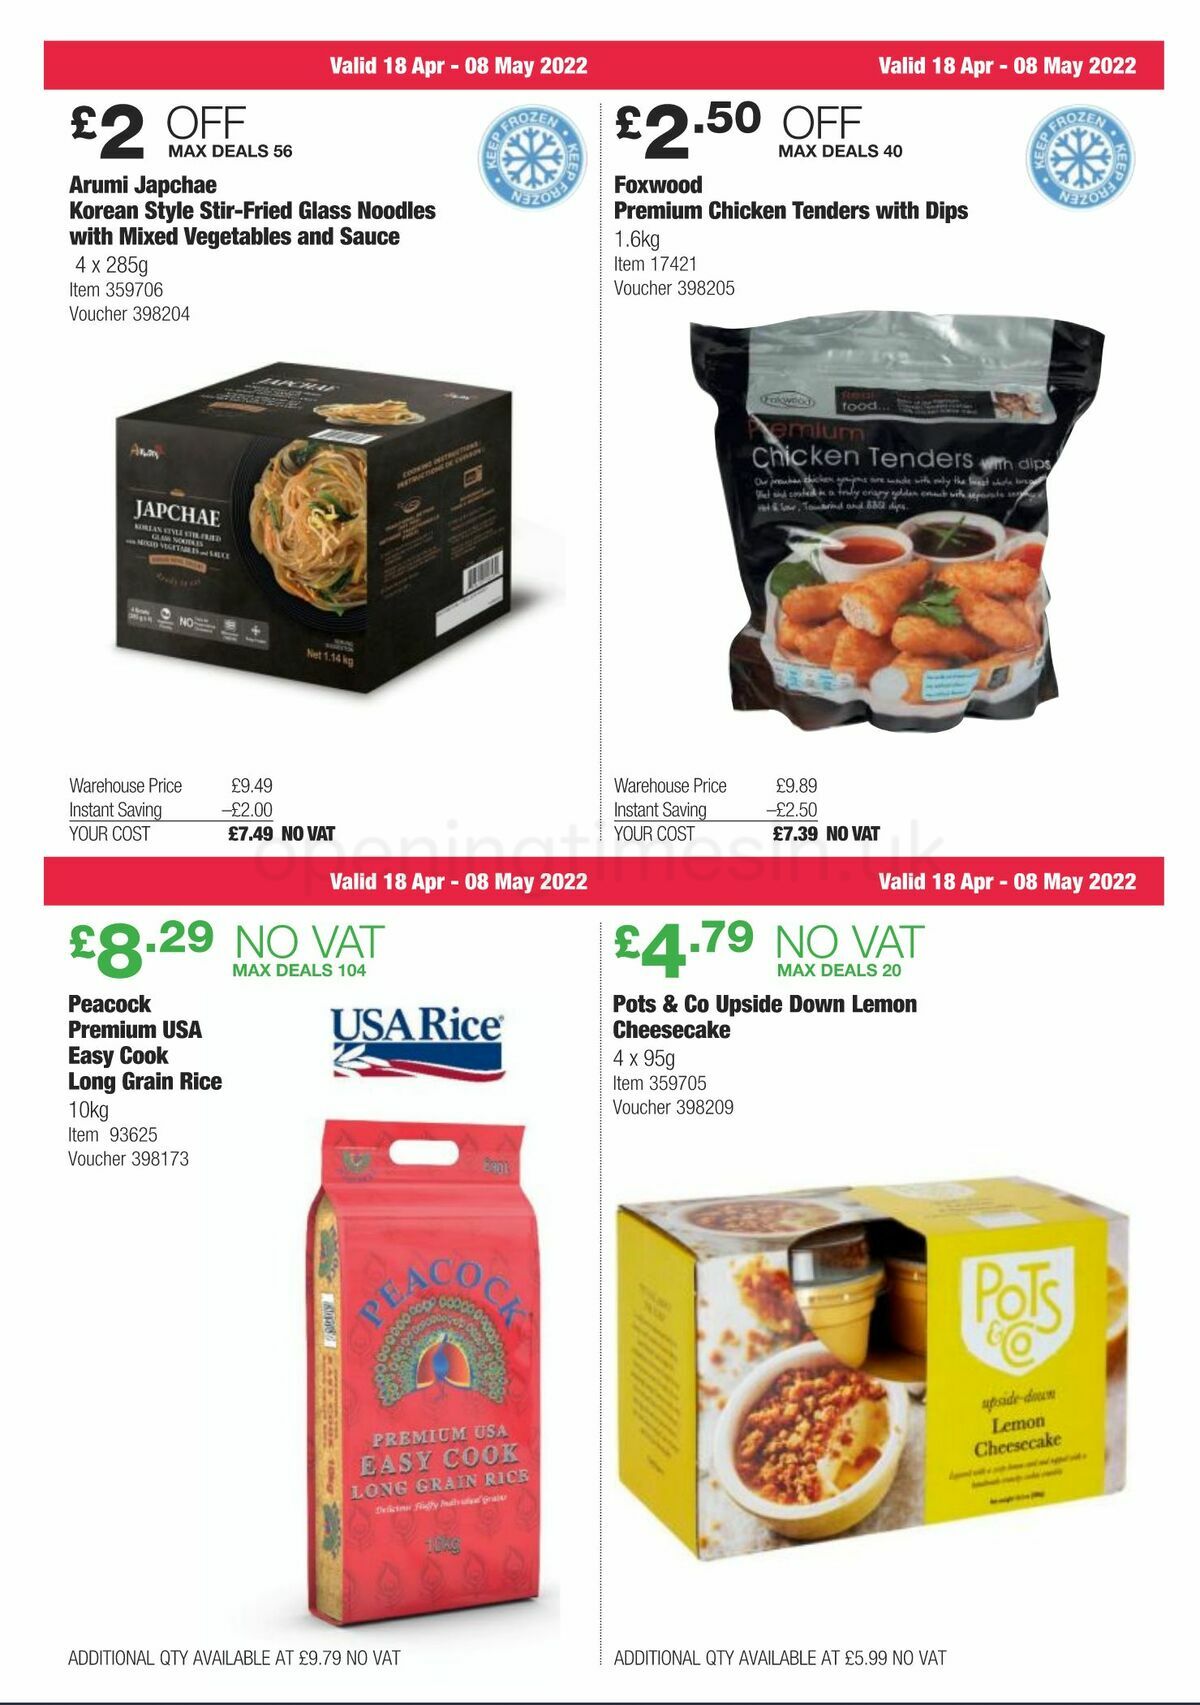 Costco Scotland & Wales Offers from 18 April